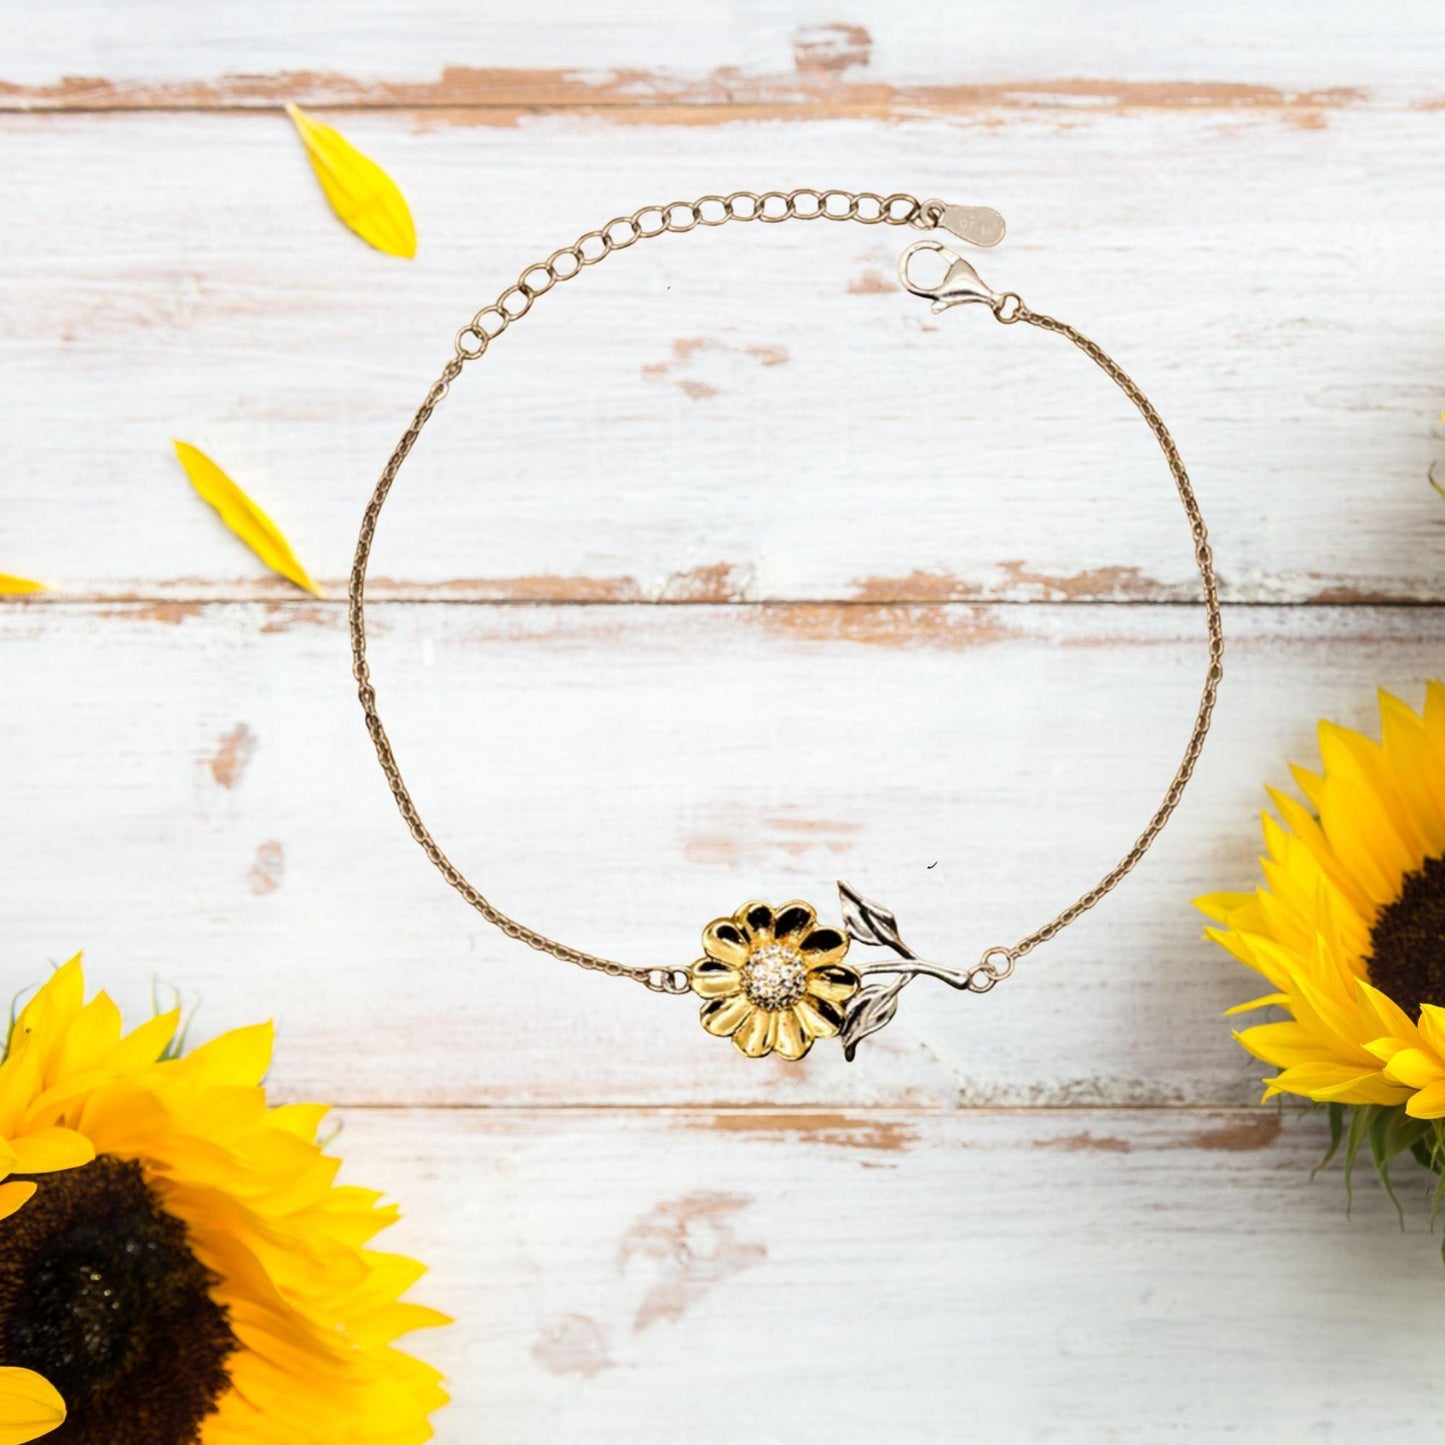 President Sunflower Bracelet - Thanks for being who you are - Birthday Christmas Jewelry Gifts Coworkers Colleague Boss - Mallard Moon Gift Shop